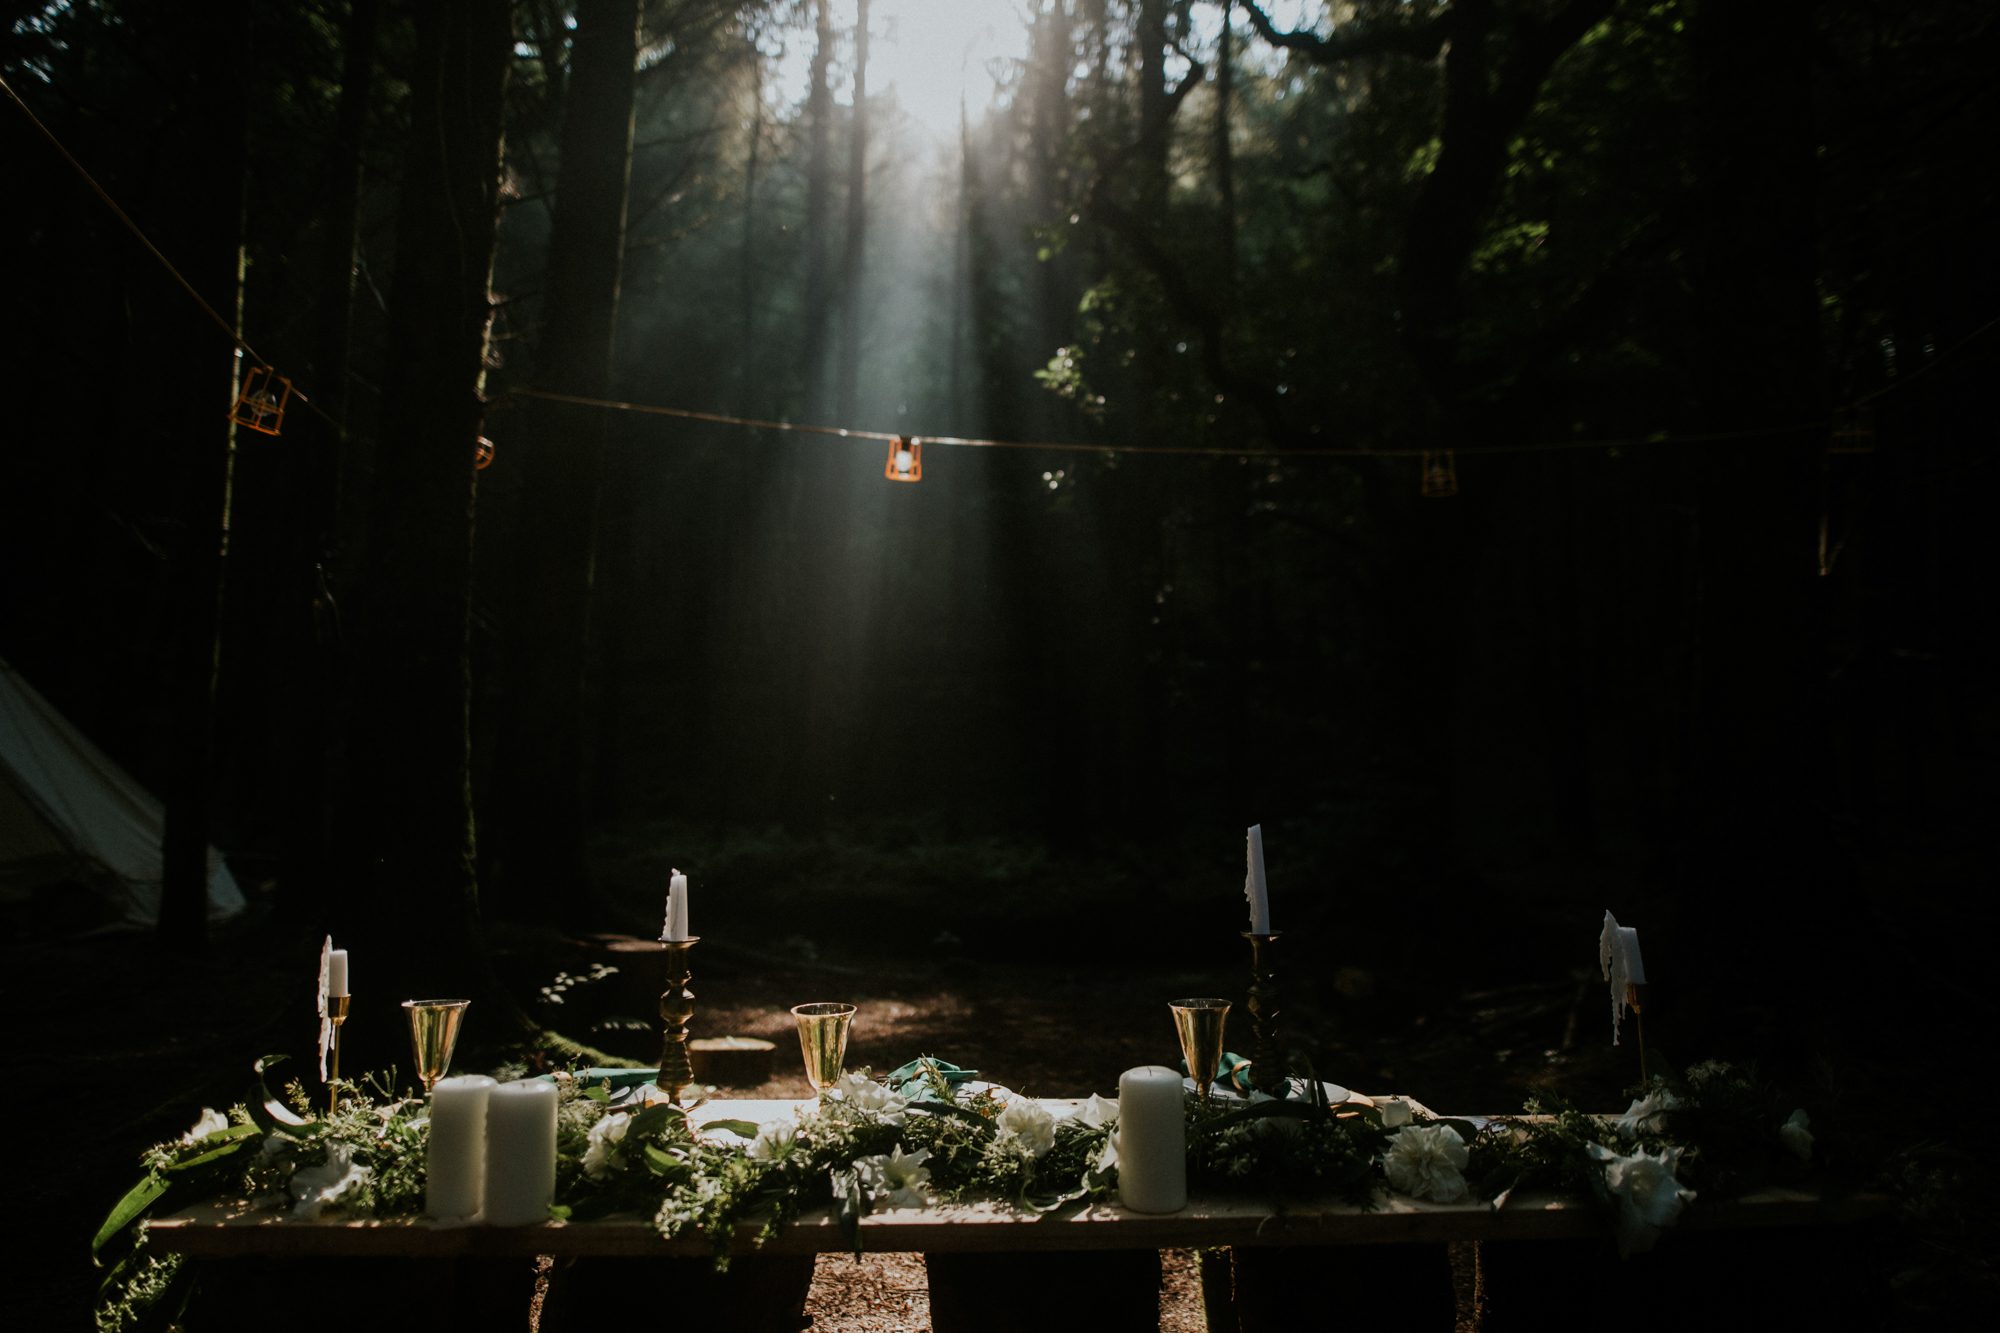 WEdding breakfast in the forest at Underpine Wood elopement venue in Bude